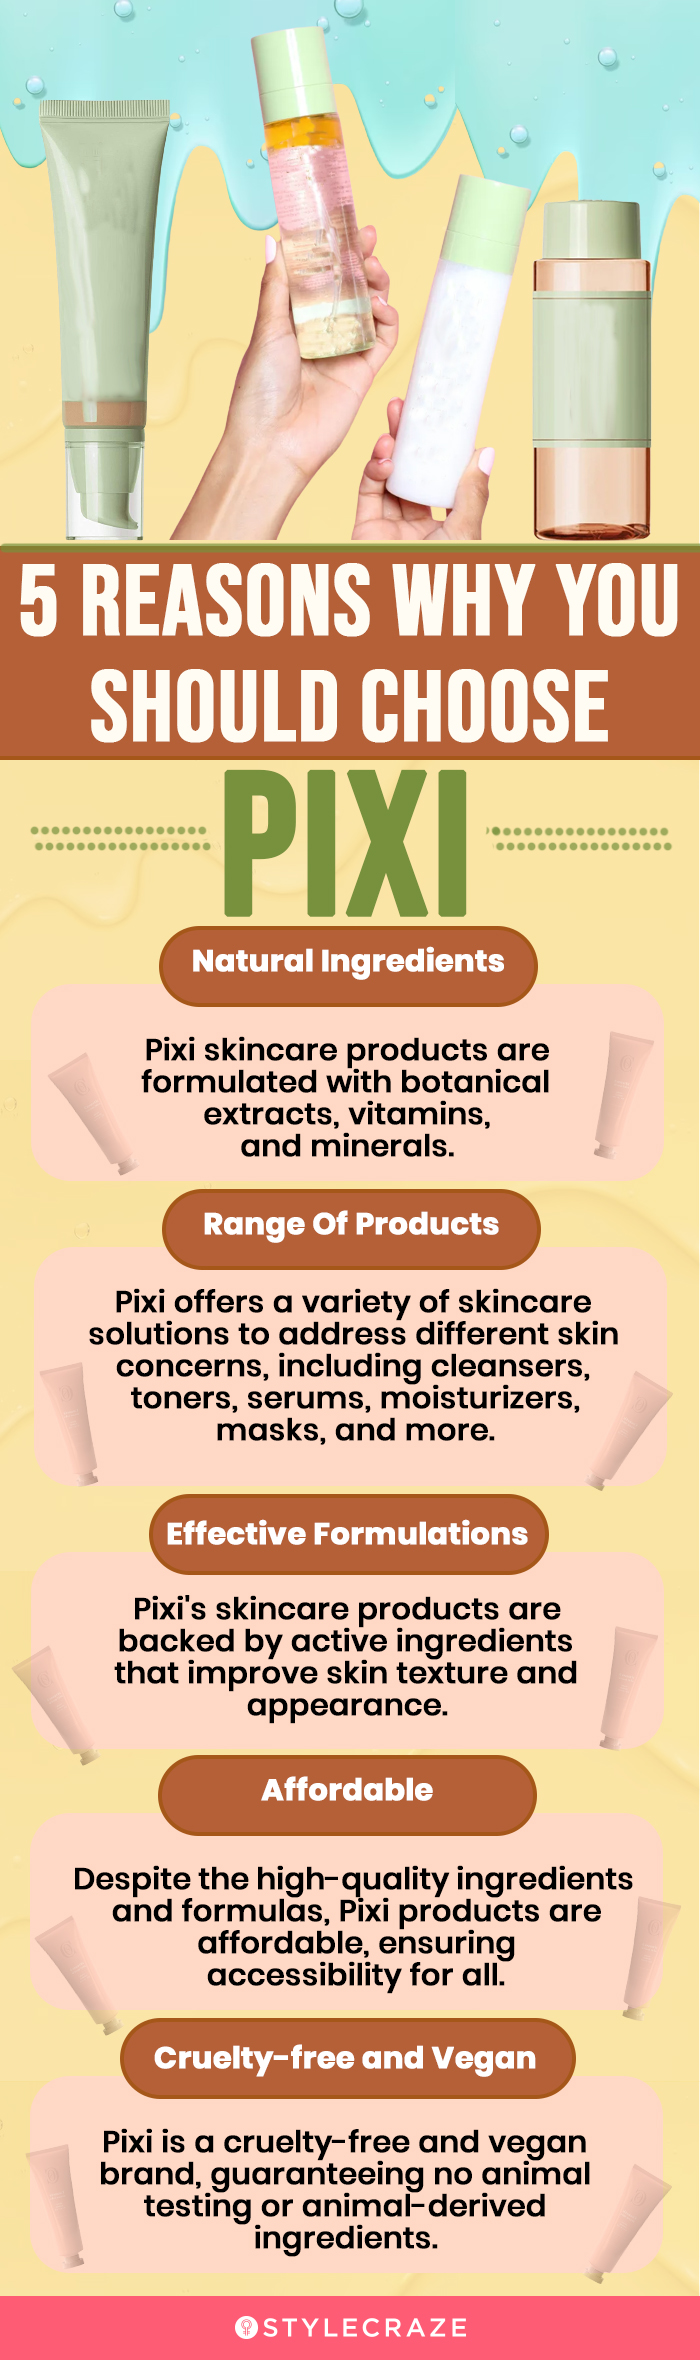 Reasons Why You Should Choose Pixi (infographic)